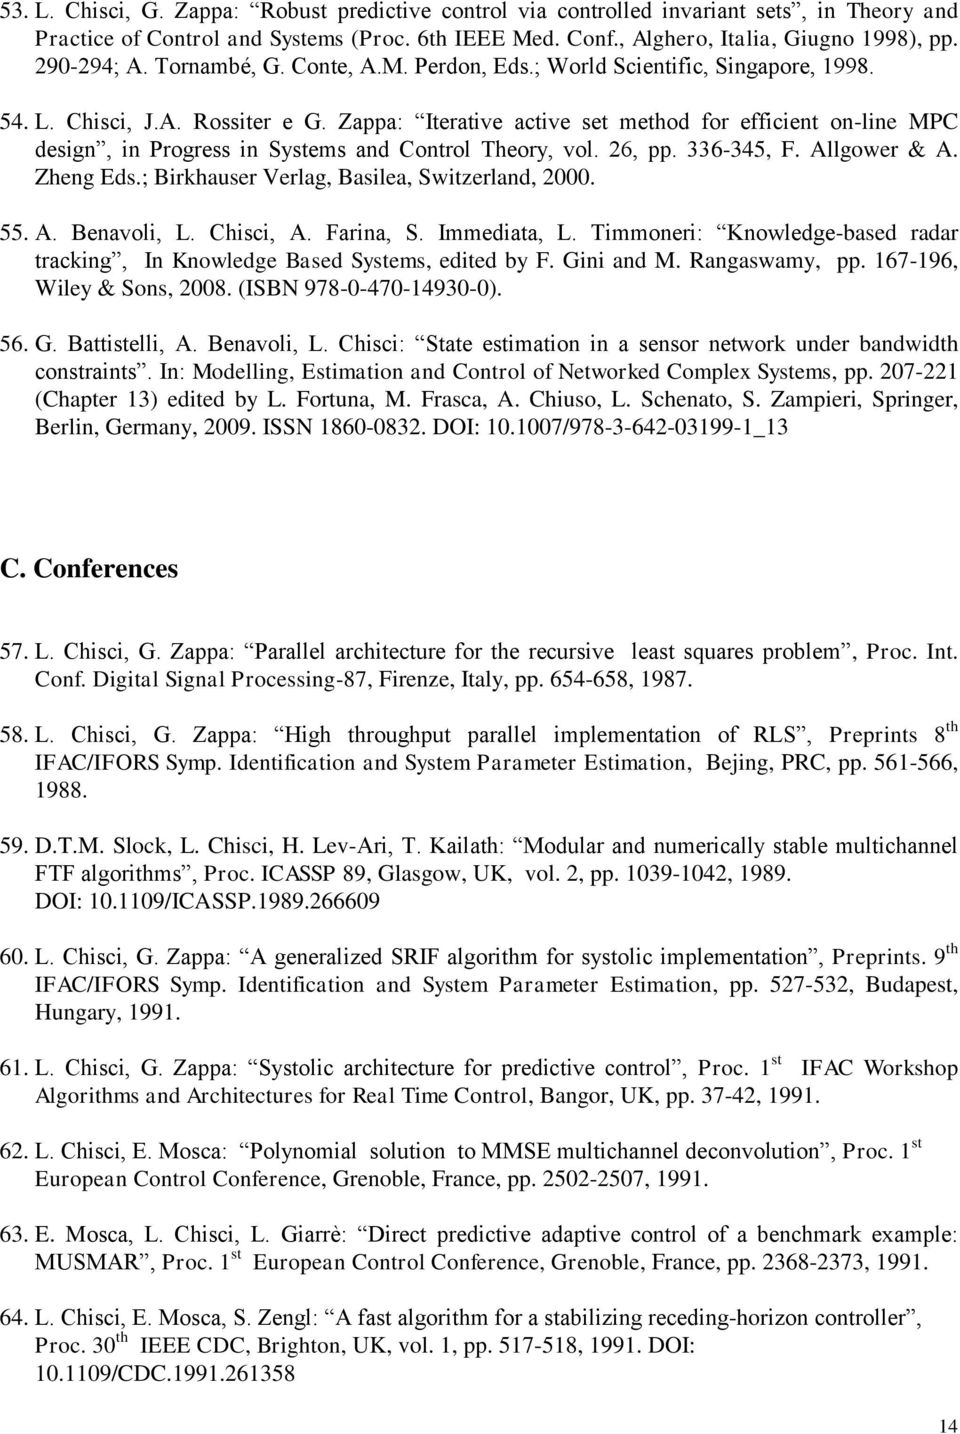 Zappa: Iterative active set method for efficient on-line MPC design, in Progress in Systems and Control Theory, vol. 26, pp. 336-345, F. Allgower & A. Zheng Eds.